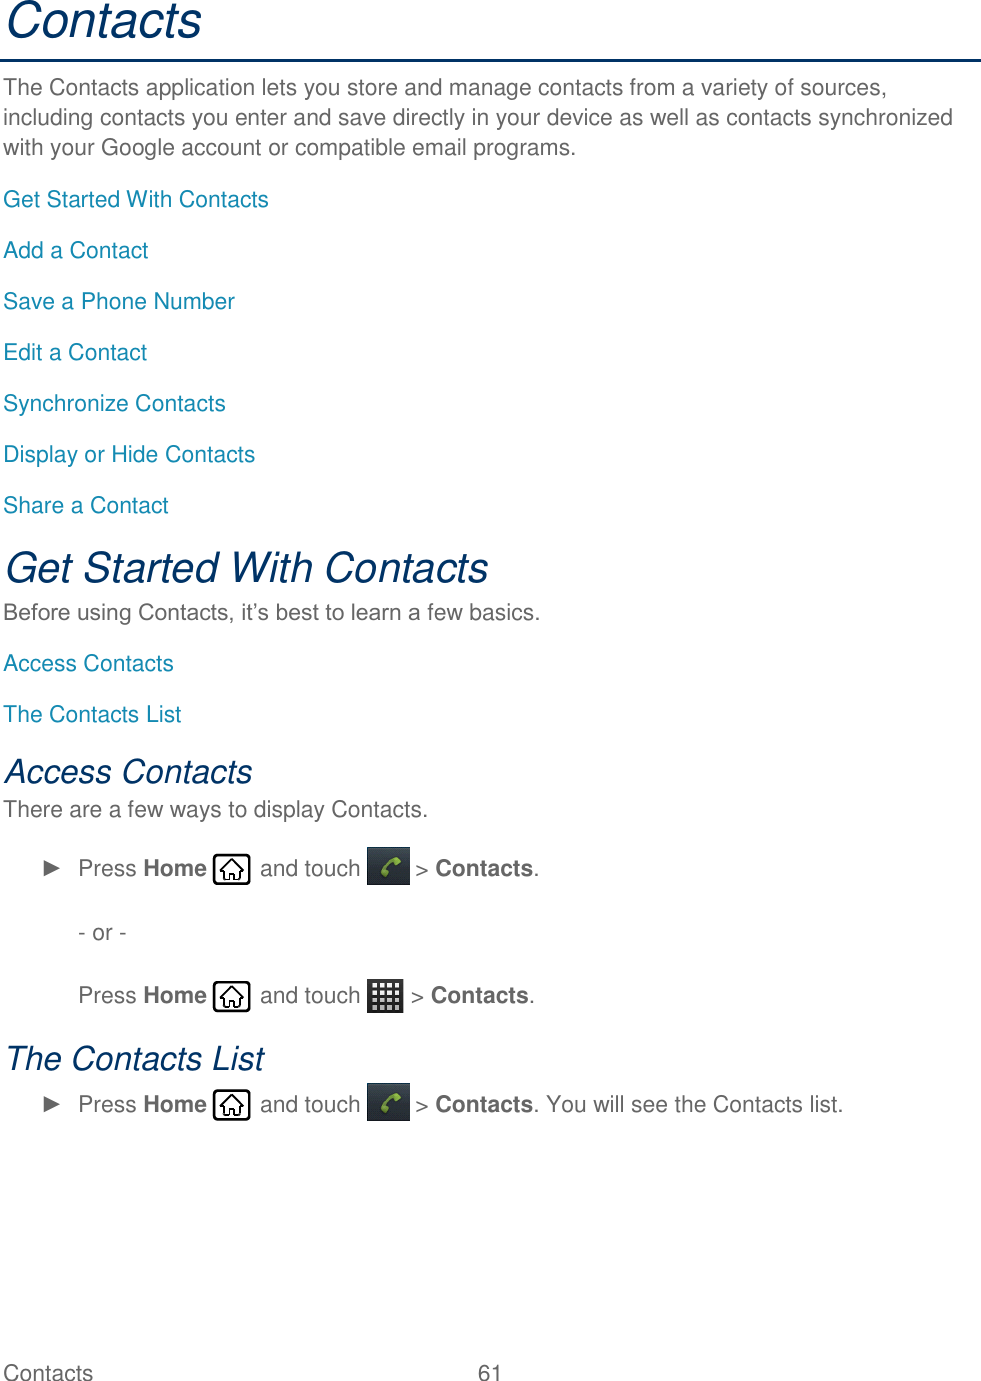 Contacts  61   Contacts The Contacts application lets you store and manage contacts from a variety of sources, including contacts you enter and save directly in your device as well as contacts synchronized with your Google account or compatible email programs. Get Started With Contacts Add a Contact Save a Phone Number Edit a Contact Synchronize Contacts Display or Hide Contacts Share a Contact Get Started With Contacts Before using Contacts, it’s best to learn a few basics. Access Contacts The Contacts List Access Contacts There are a few ways to display Contacts. ►  Press Home   and touch   &gt; Contacts.  - or -   Press Home   and touch   &gt; Contacts. The Contacts List ►  Press Home   and touch   &gt; Contacts. You will see the Contacts list.  